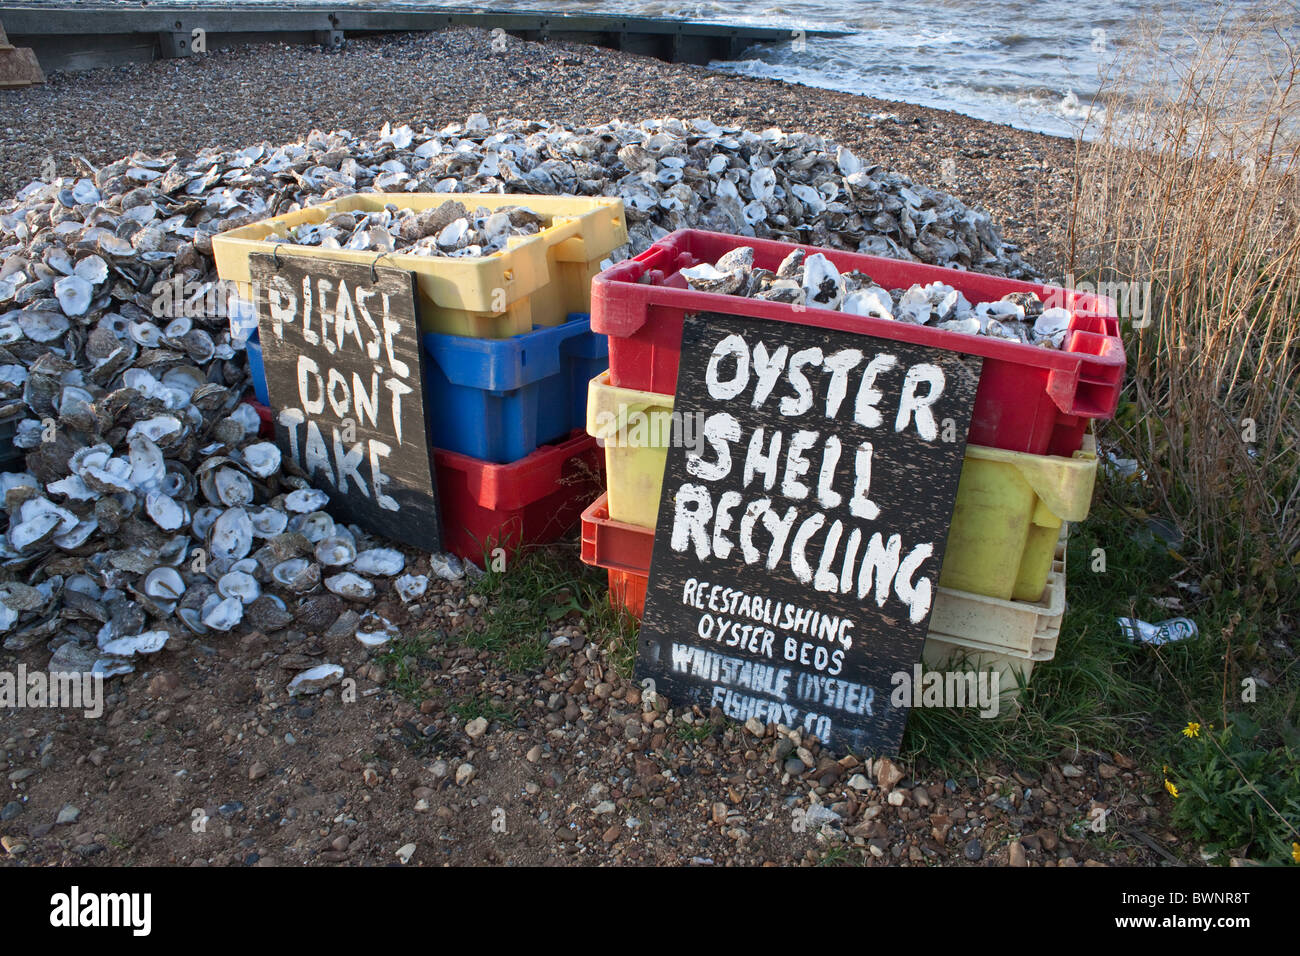 Oyster Shell Recycling at Whitstable Harbour to re-establish oyster beds. Stock Photo